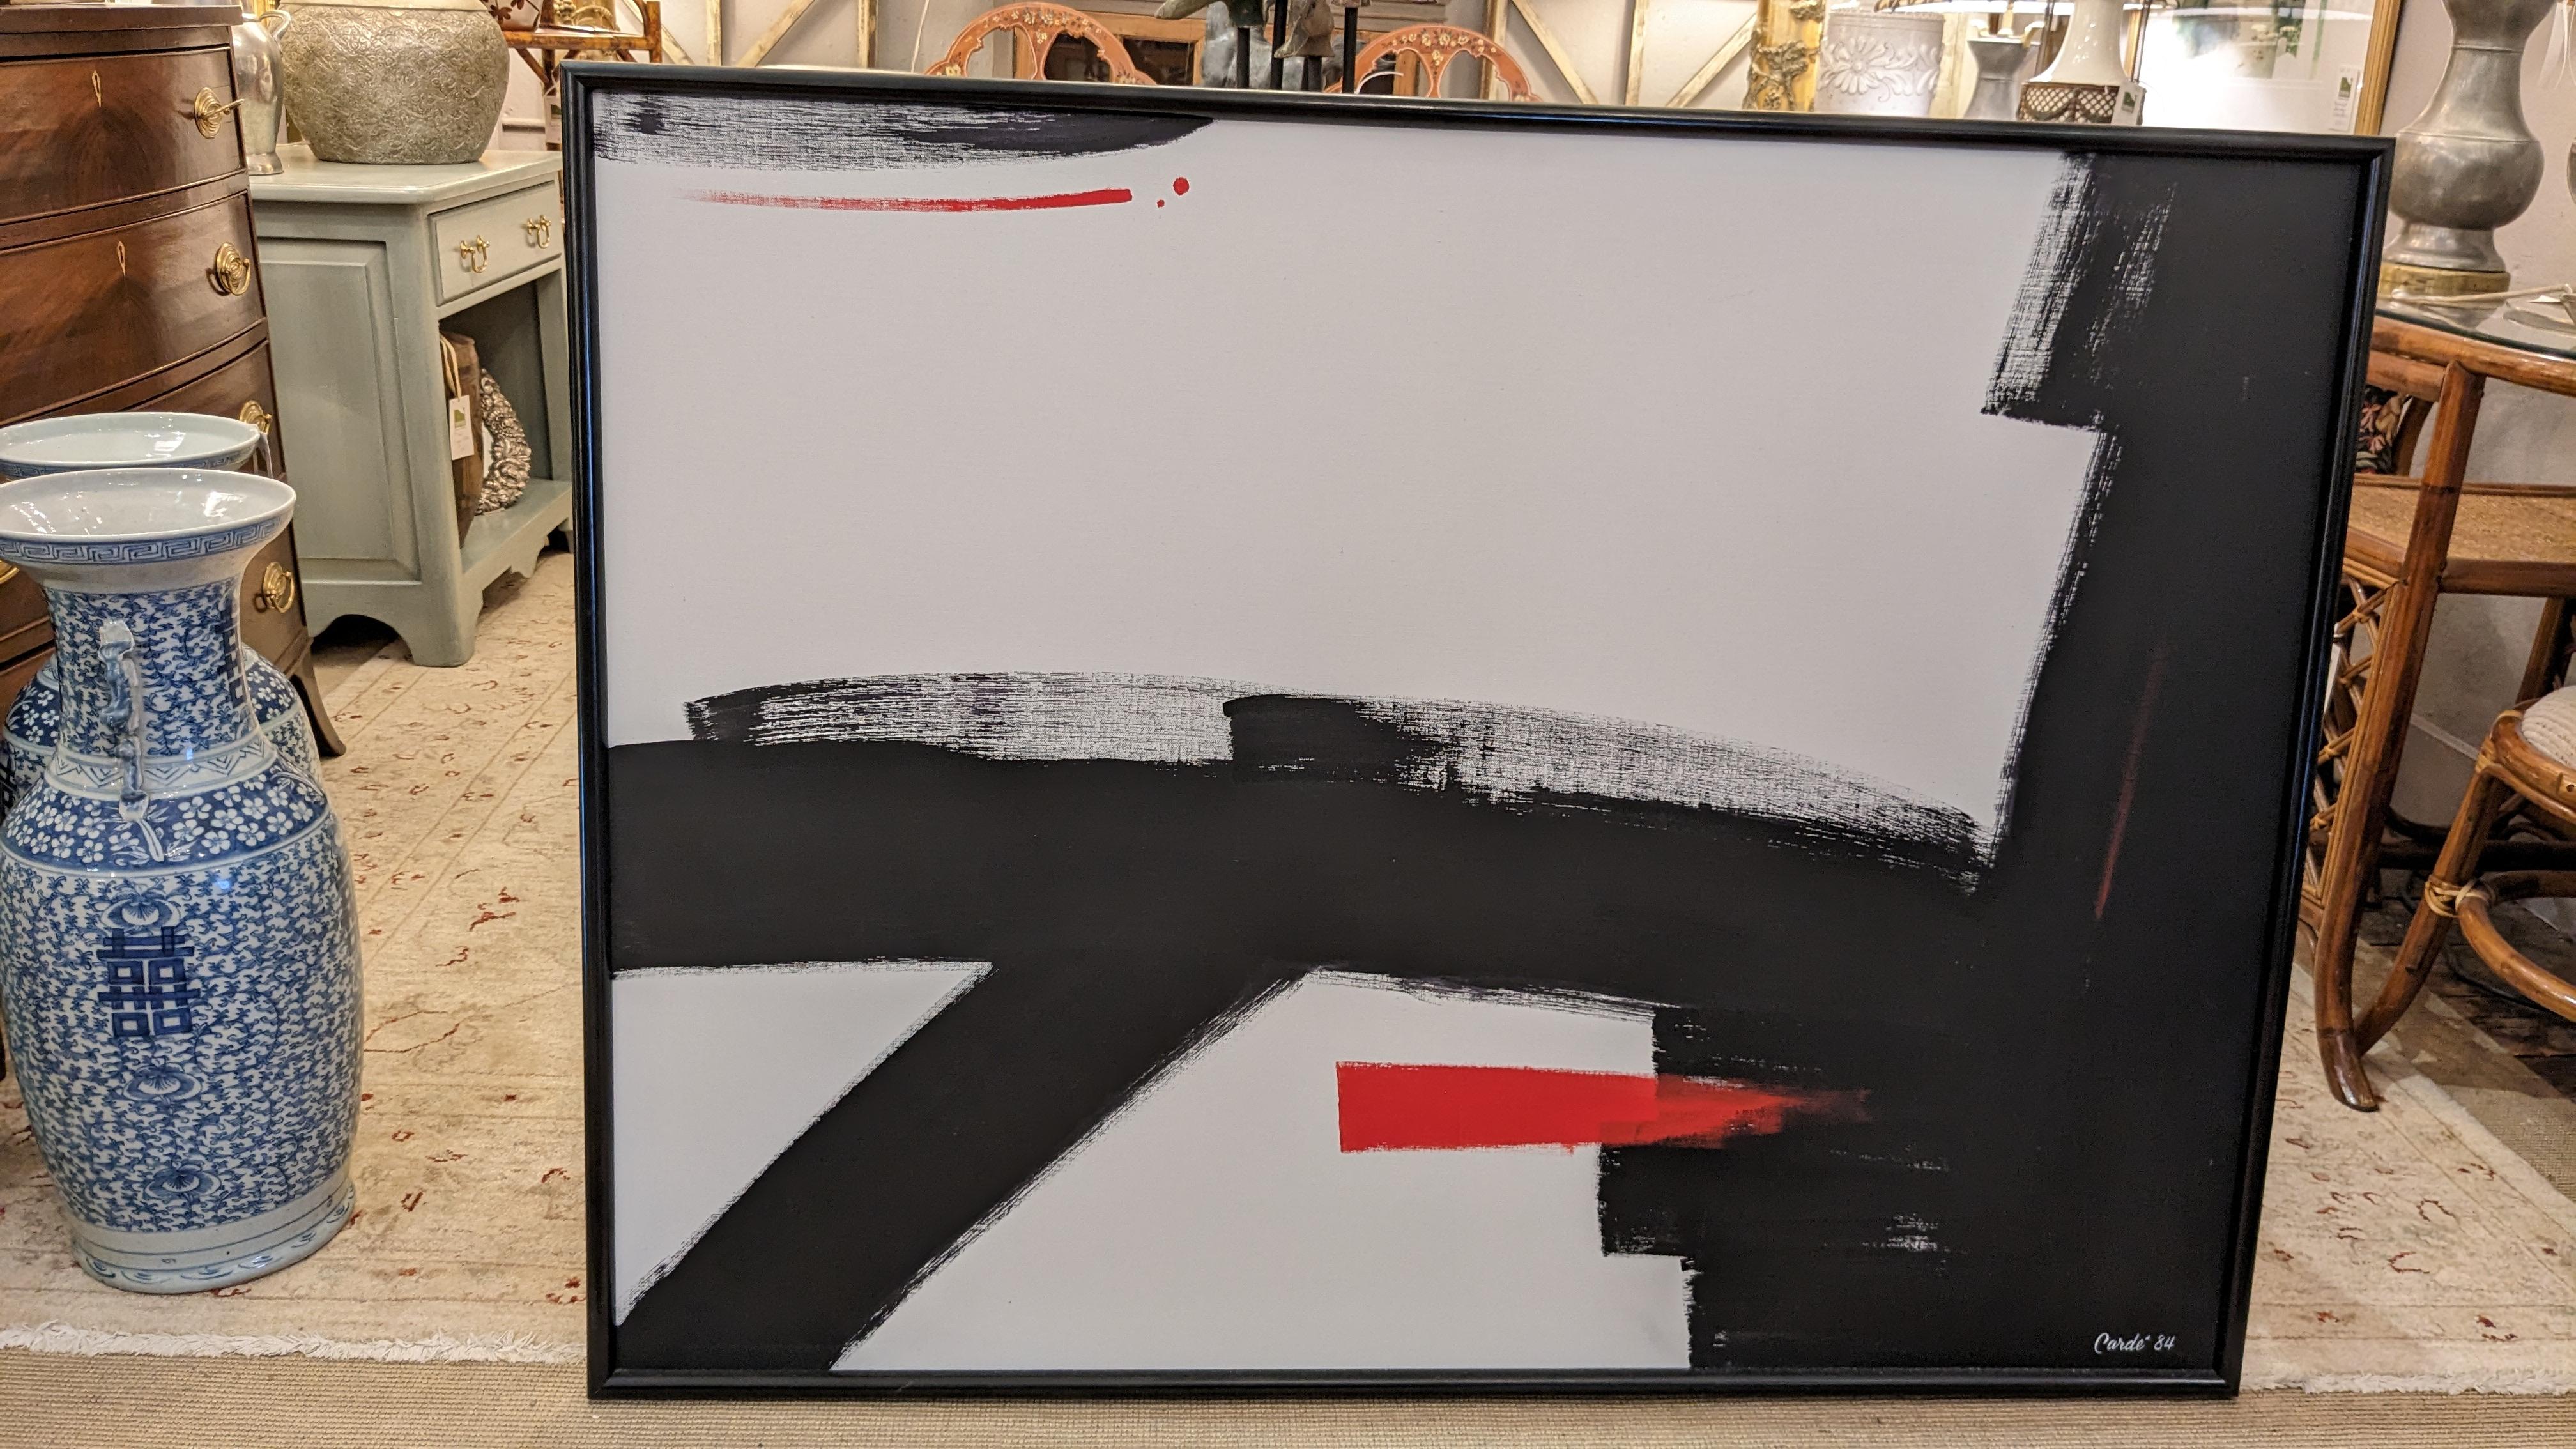 Striking bold abstract painting signed Carde 1984, having slashes of 
black and white and a comet flash of red. Framed in a light
weight black plastic frame typical of the time period.